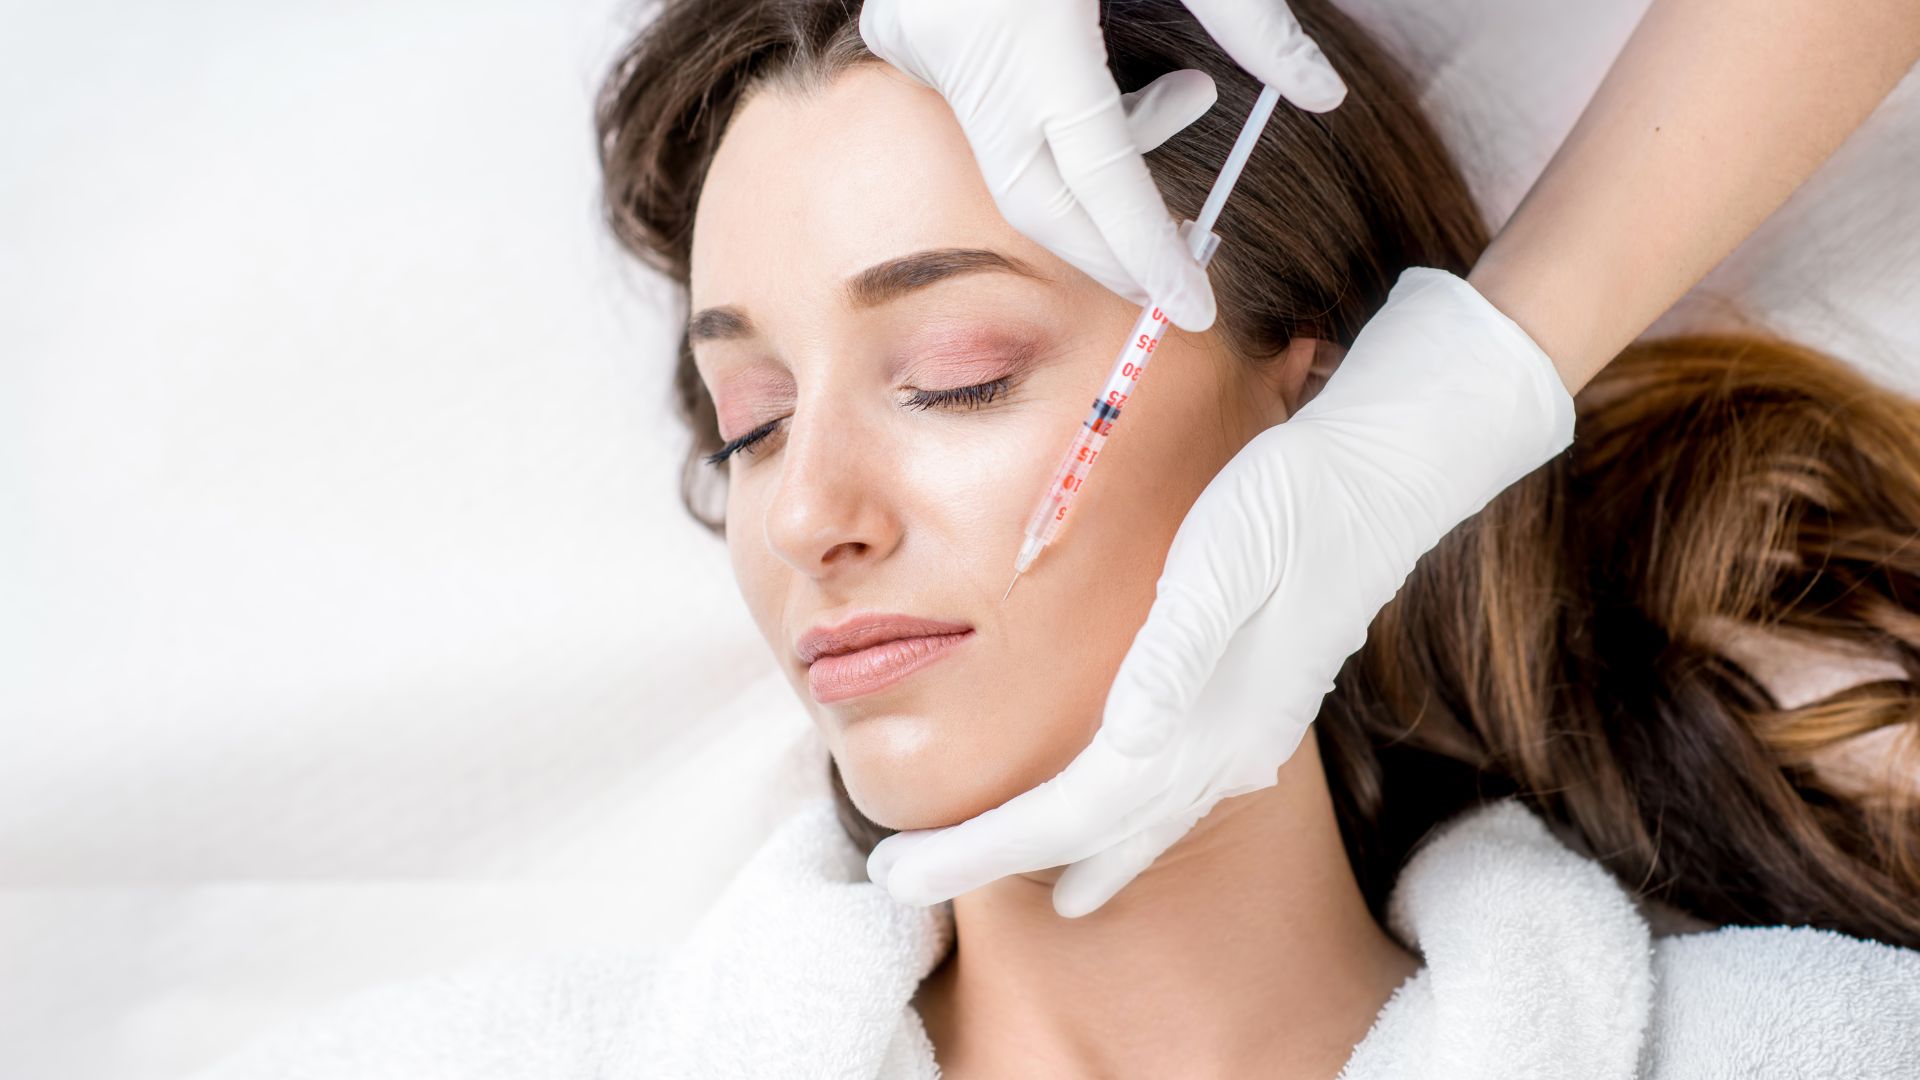 Skin Booster in Dubai - Doctor Injecting Skin Booster to Woman's Face